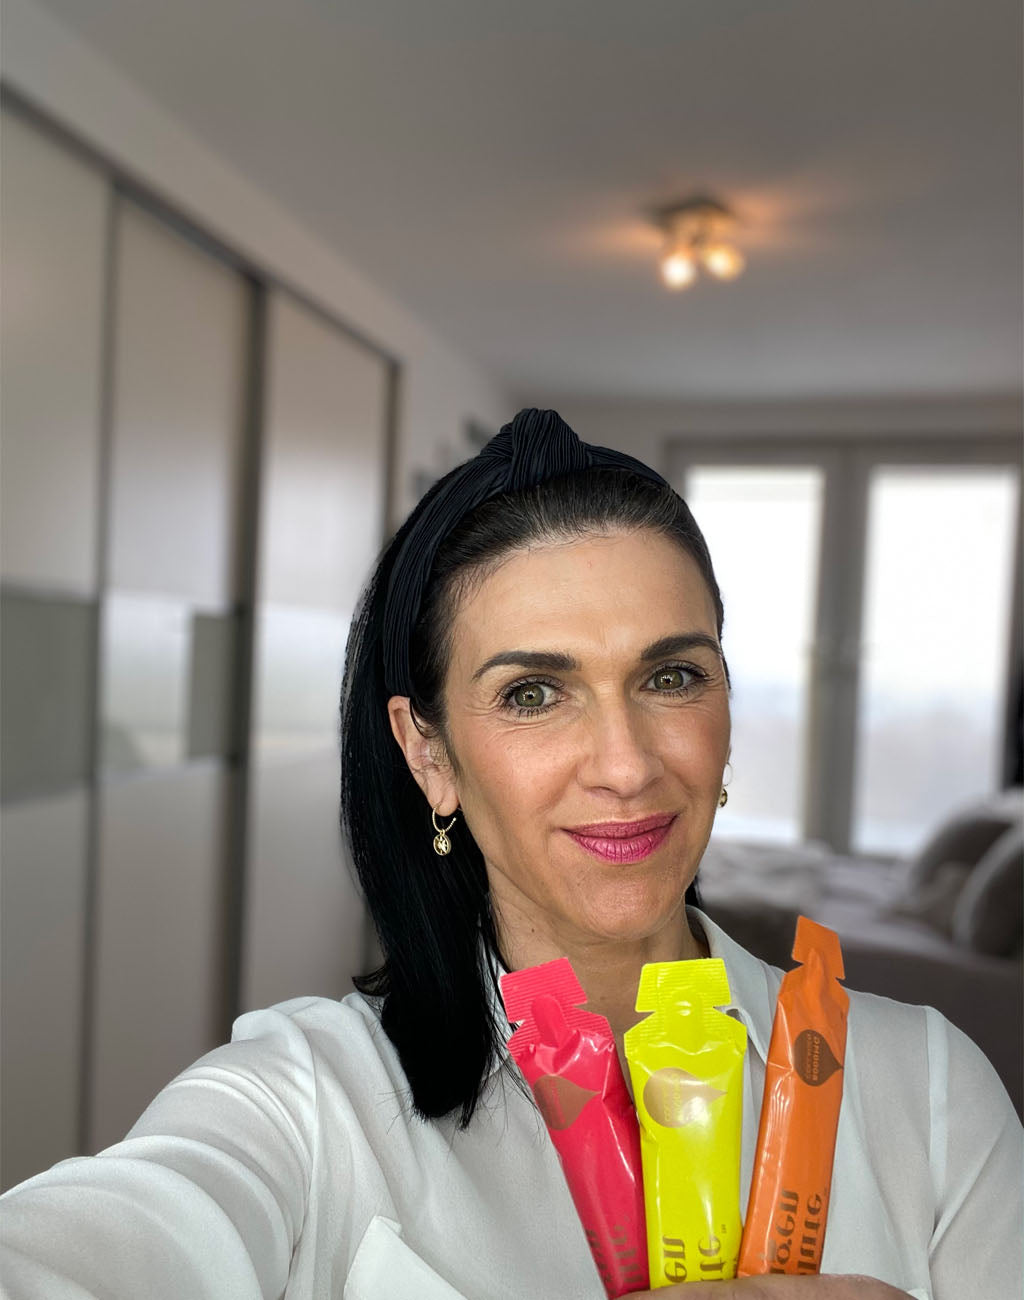 Photo showing a slightly smiling white woman with long dark hair, she is holding up three sachets of Absolute Collagen and taking a selfie in her bedroom